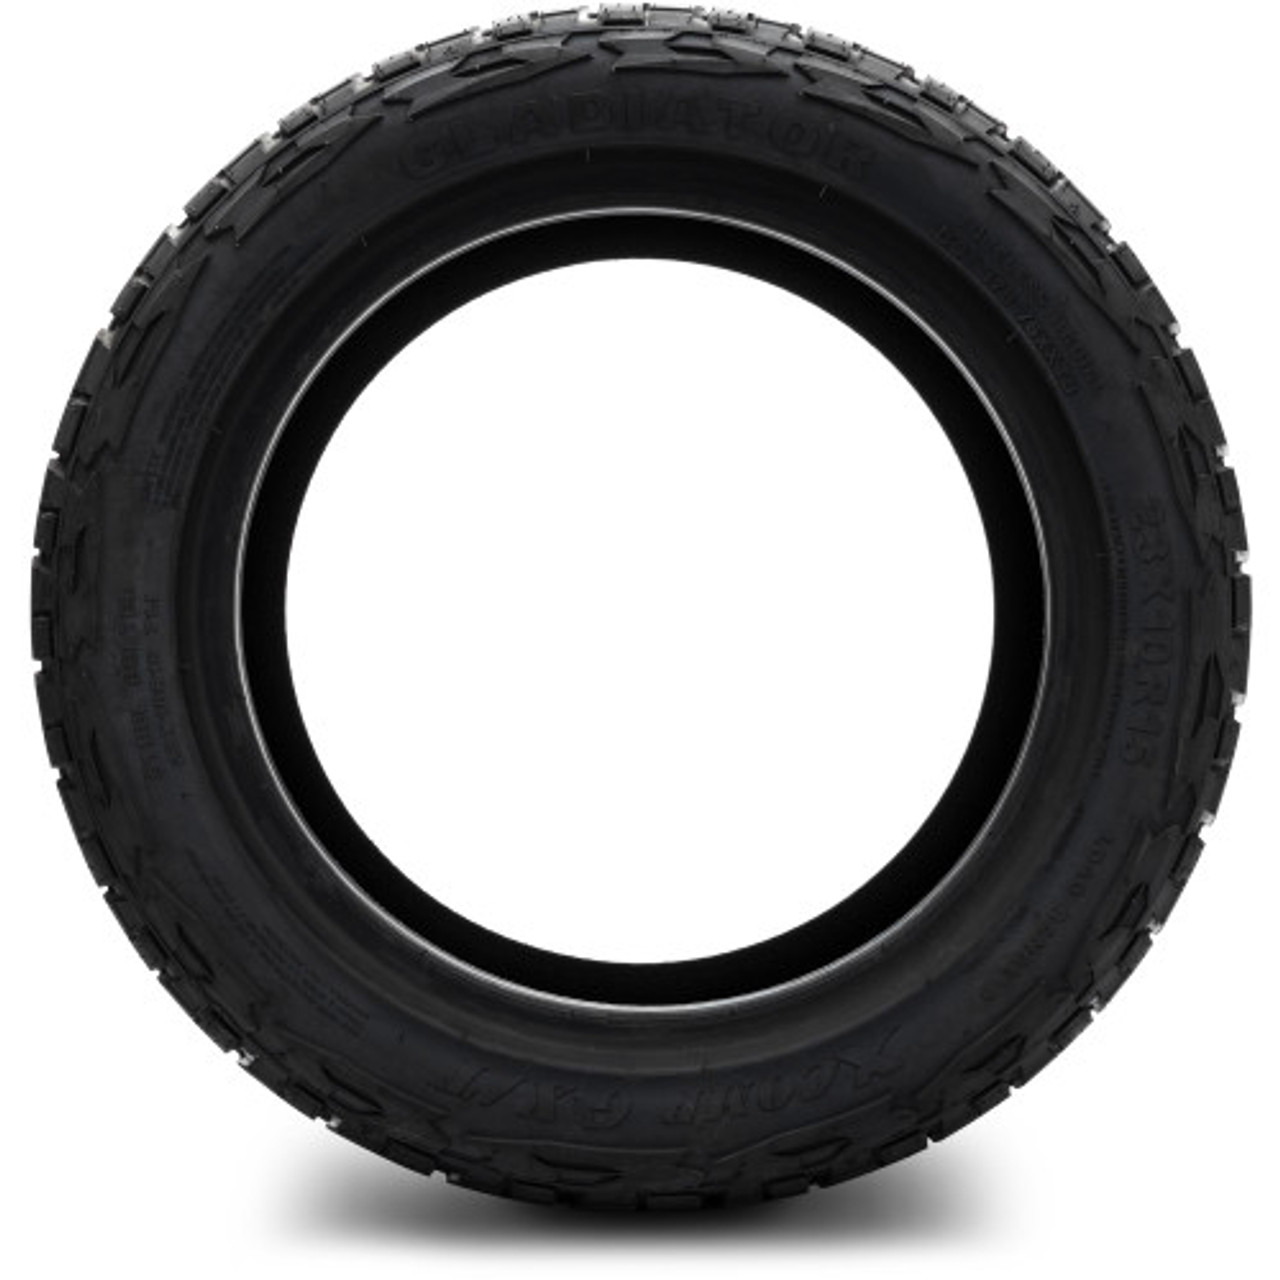 Xcomp Gladiator 23x10-R15 Steel Belted Radial Golf Cart Tire